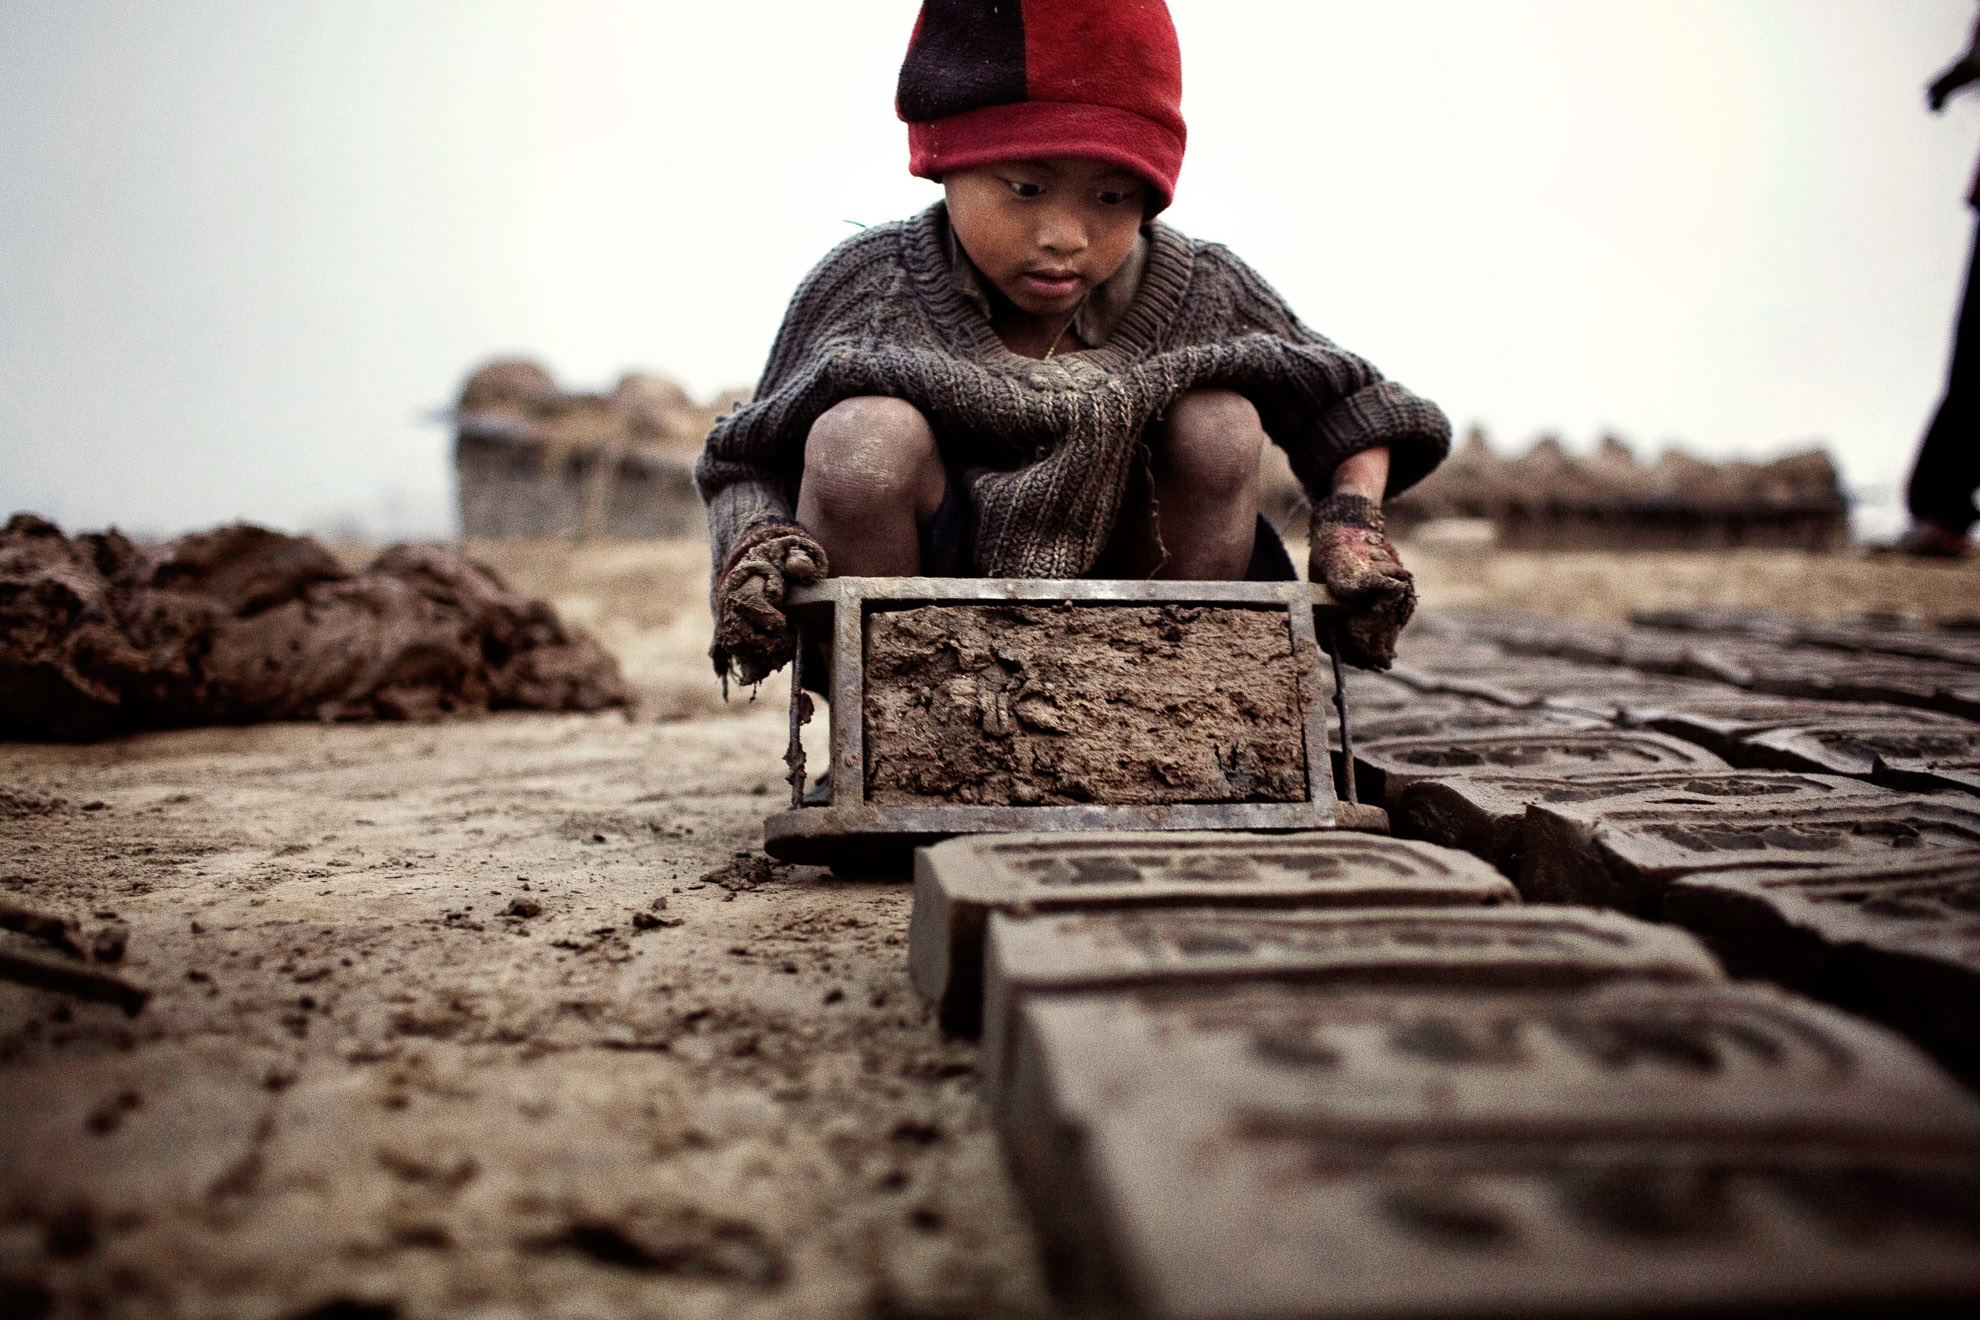 7 a.m. and Yadhu, aged 4, is already making bricks. His working day will end around 6 pm. From the age of 4, these children are forced to go out to work to bring home money for their families.